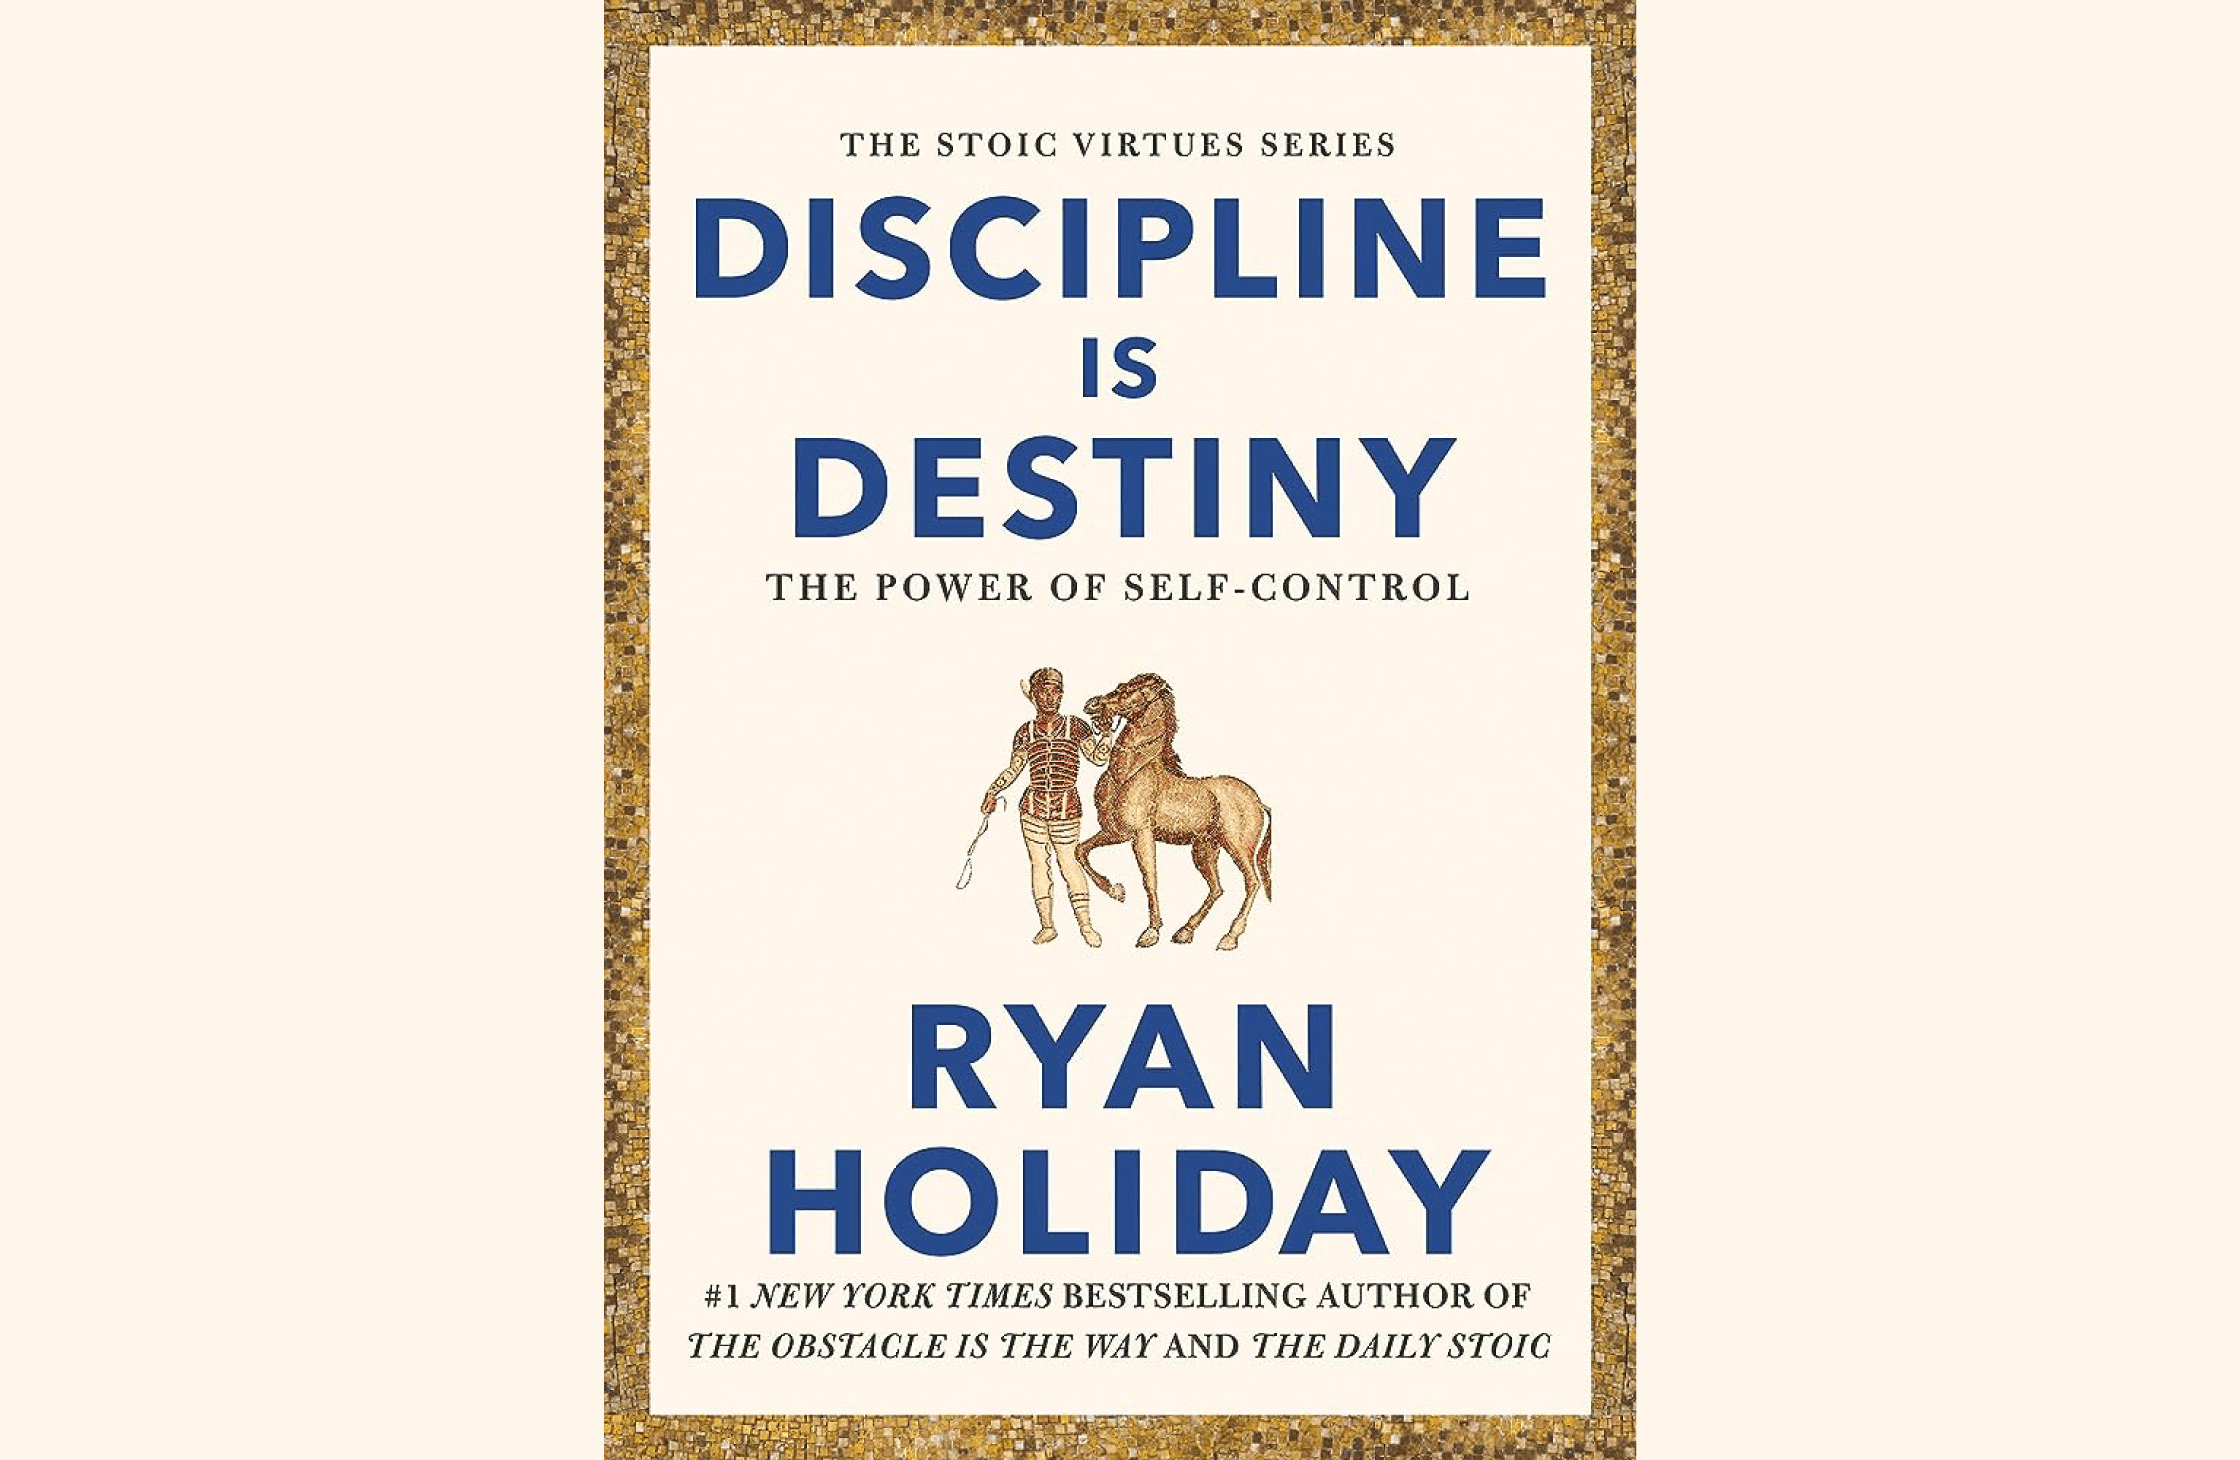 Summary: Discipline Is Destiny: The Power of Self-Control by Ryan Holiday